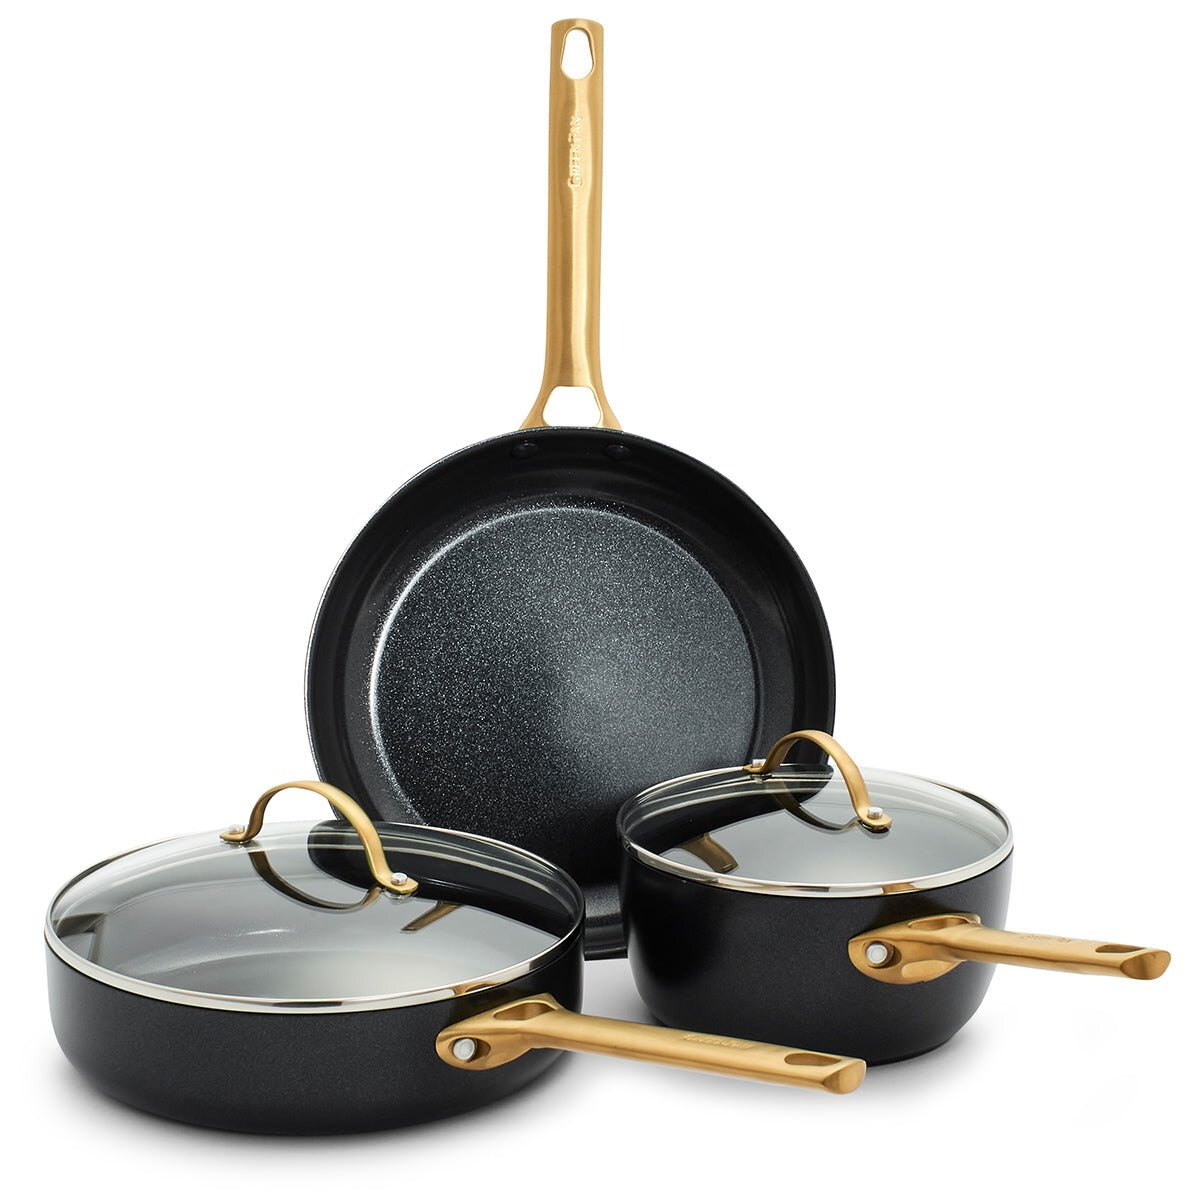  Black and Gold Pots and Pans Set Nonstick - 15PC Luxe Black Pots  and Pans Set Non Toxic - Induction Compatible, PFOA Free Black and Gold  Cookware Set & Gold Kitchen